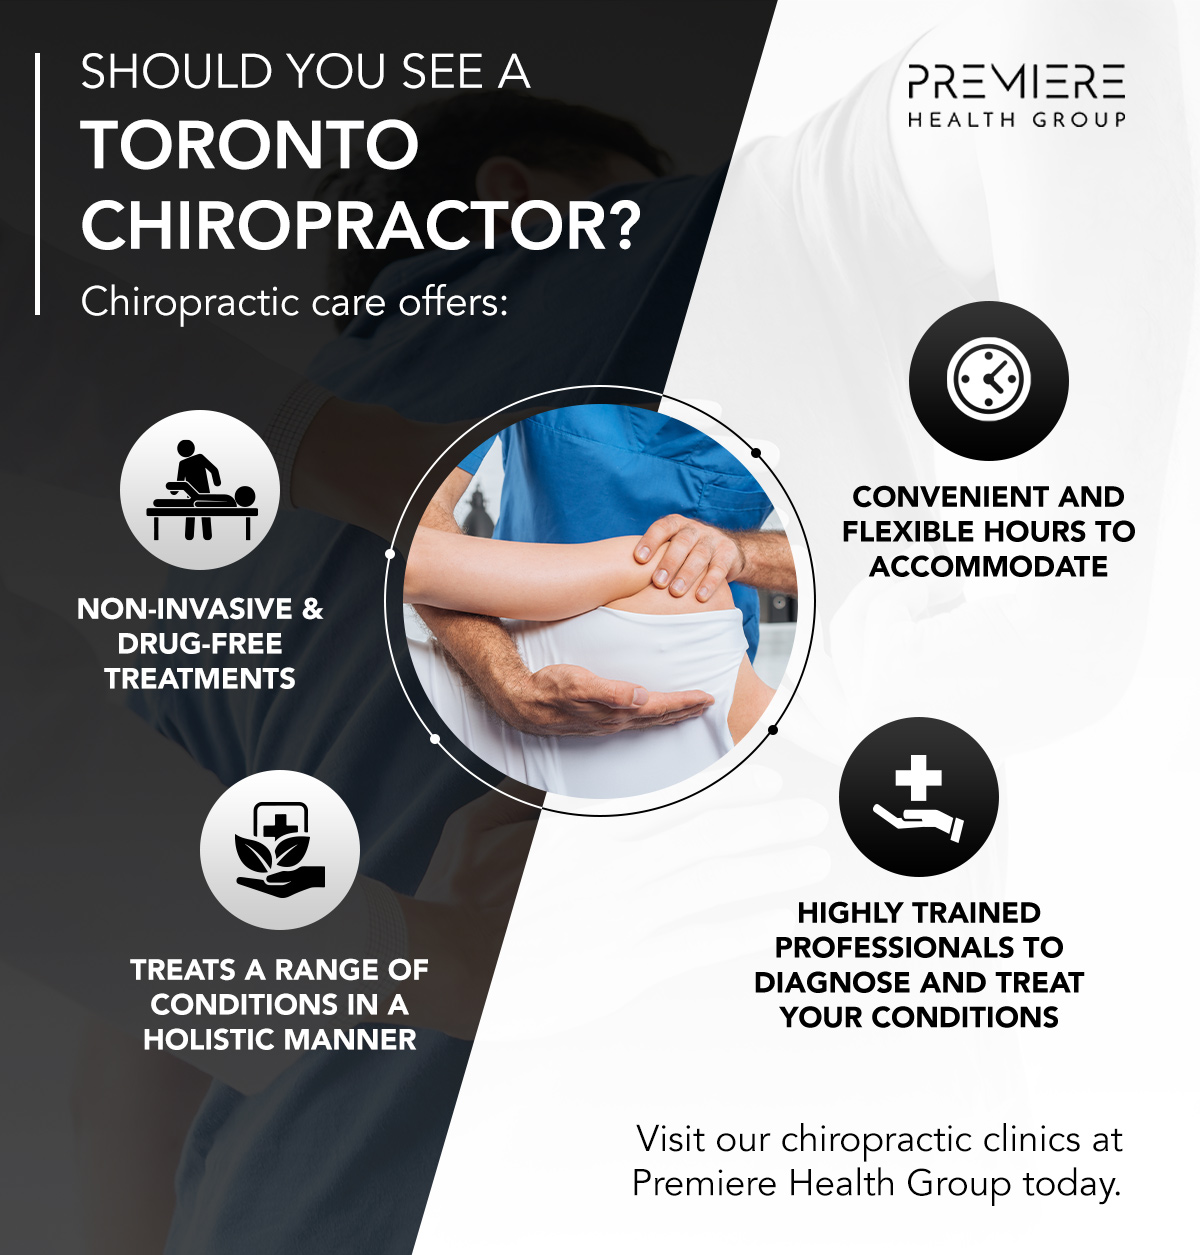 Should You See a Toronto Chiropractor? 2